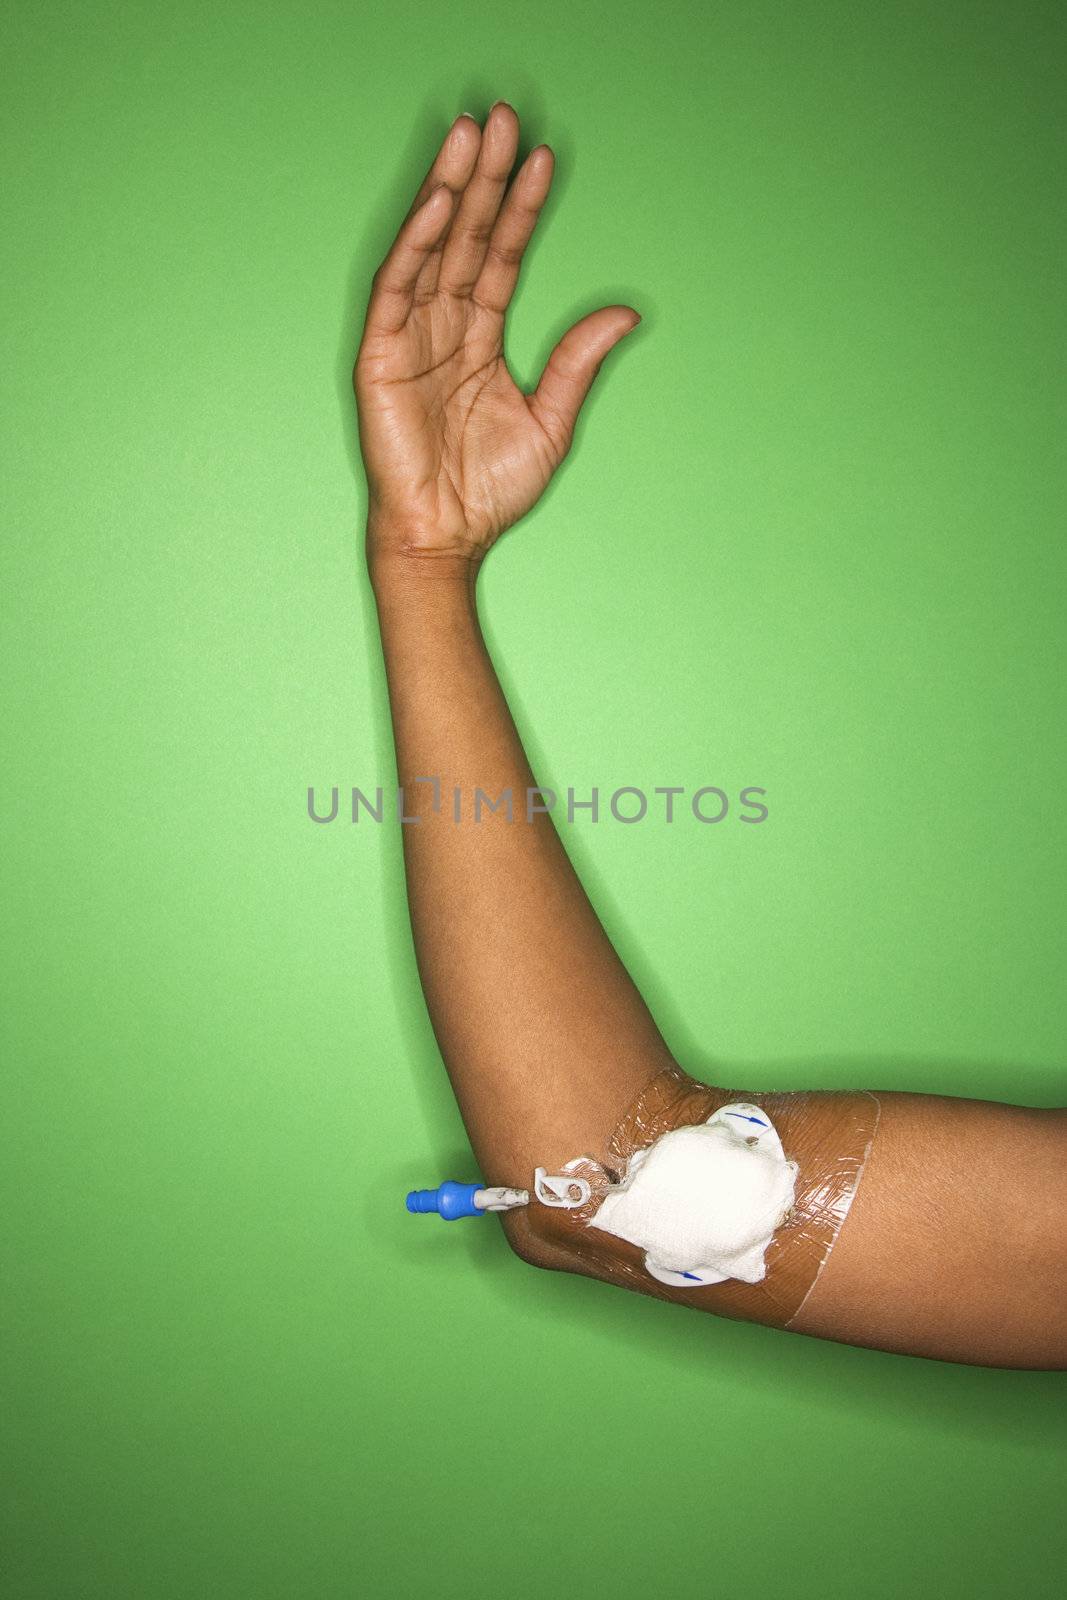 African-American female arm with bandage gauze and IV.